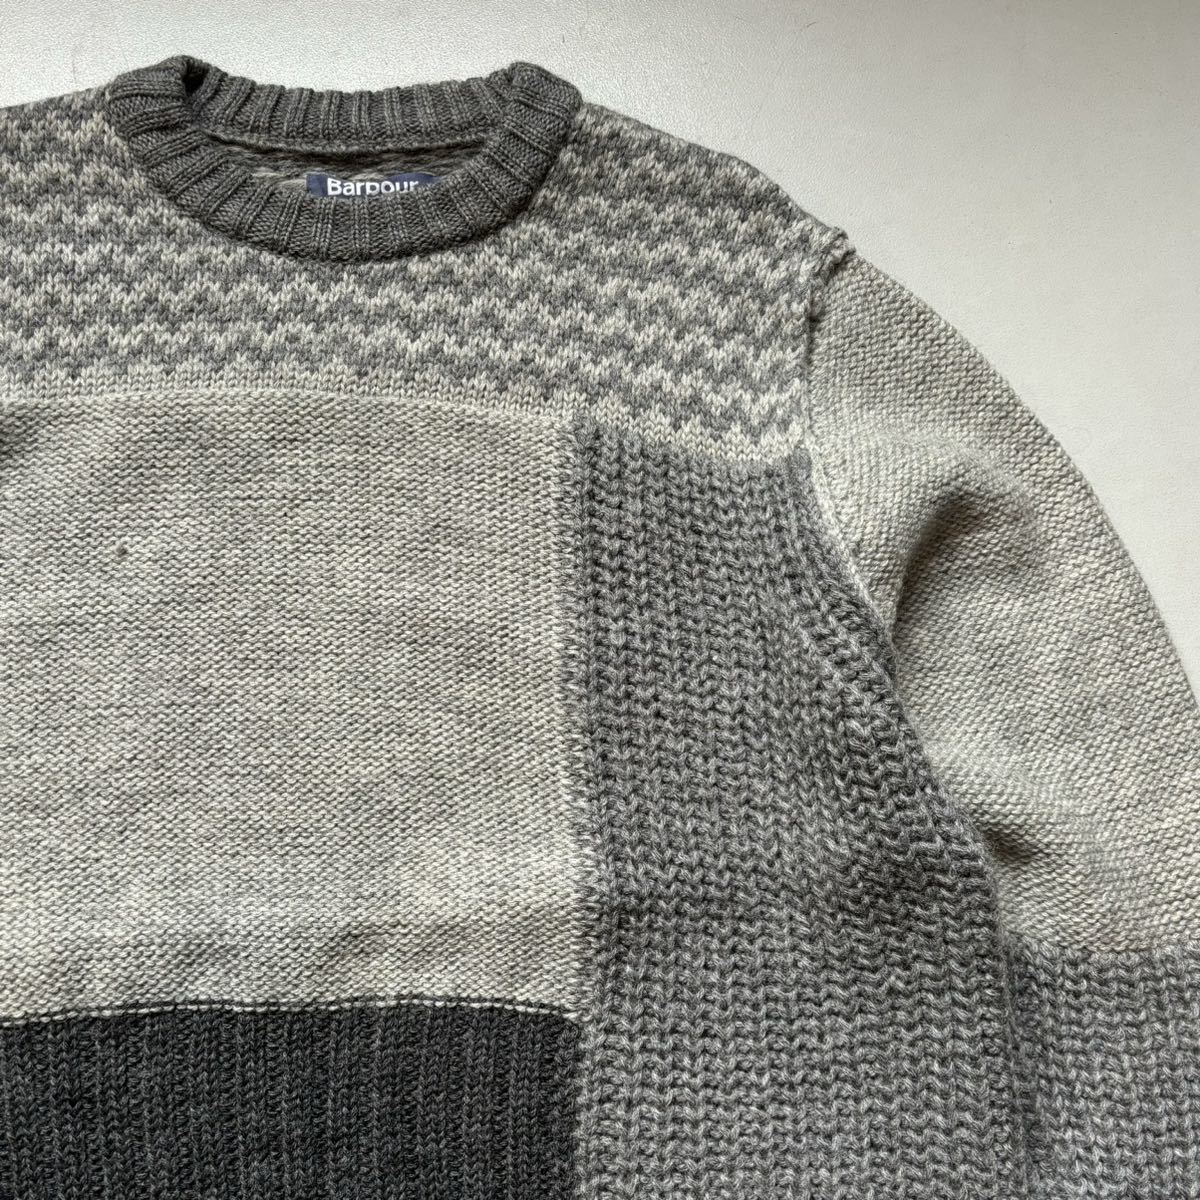 Barbour × White mountaineering patchwork knit sweater “size XL” バブアー×ホワイトマウンテニアリング パッチワークニットセーター_画像3